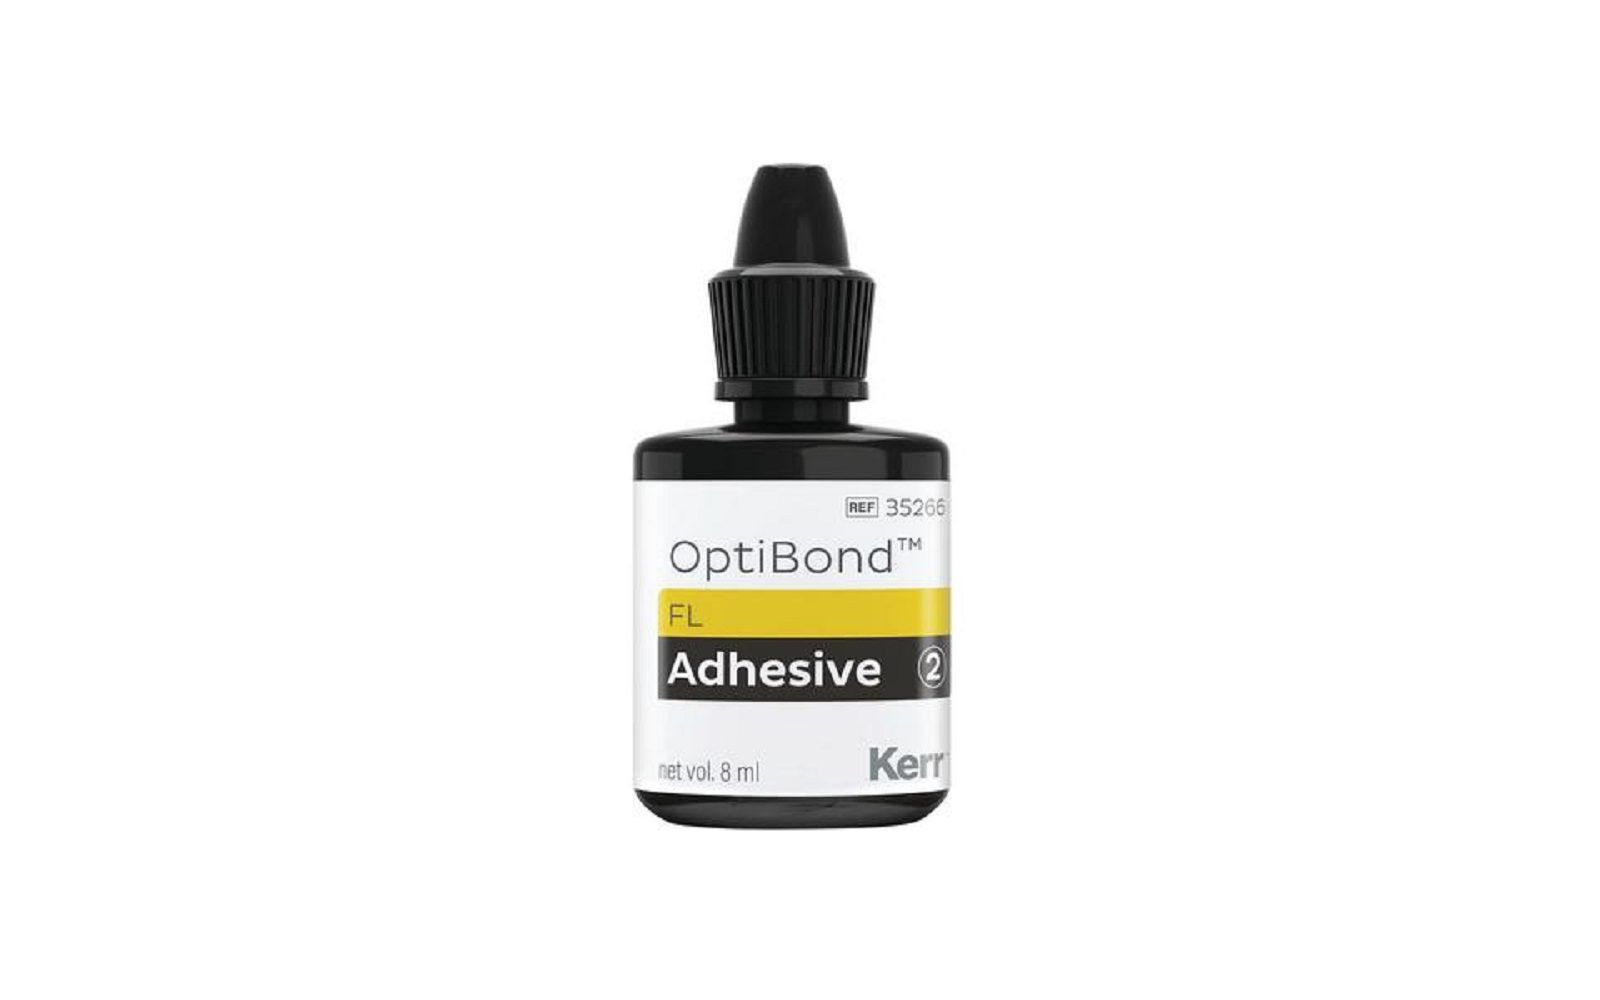 Optibond fl® adhesive system with fluoride release adhesive refill – #2, 8 ml